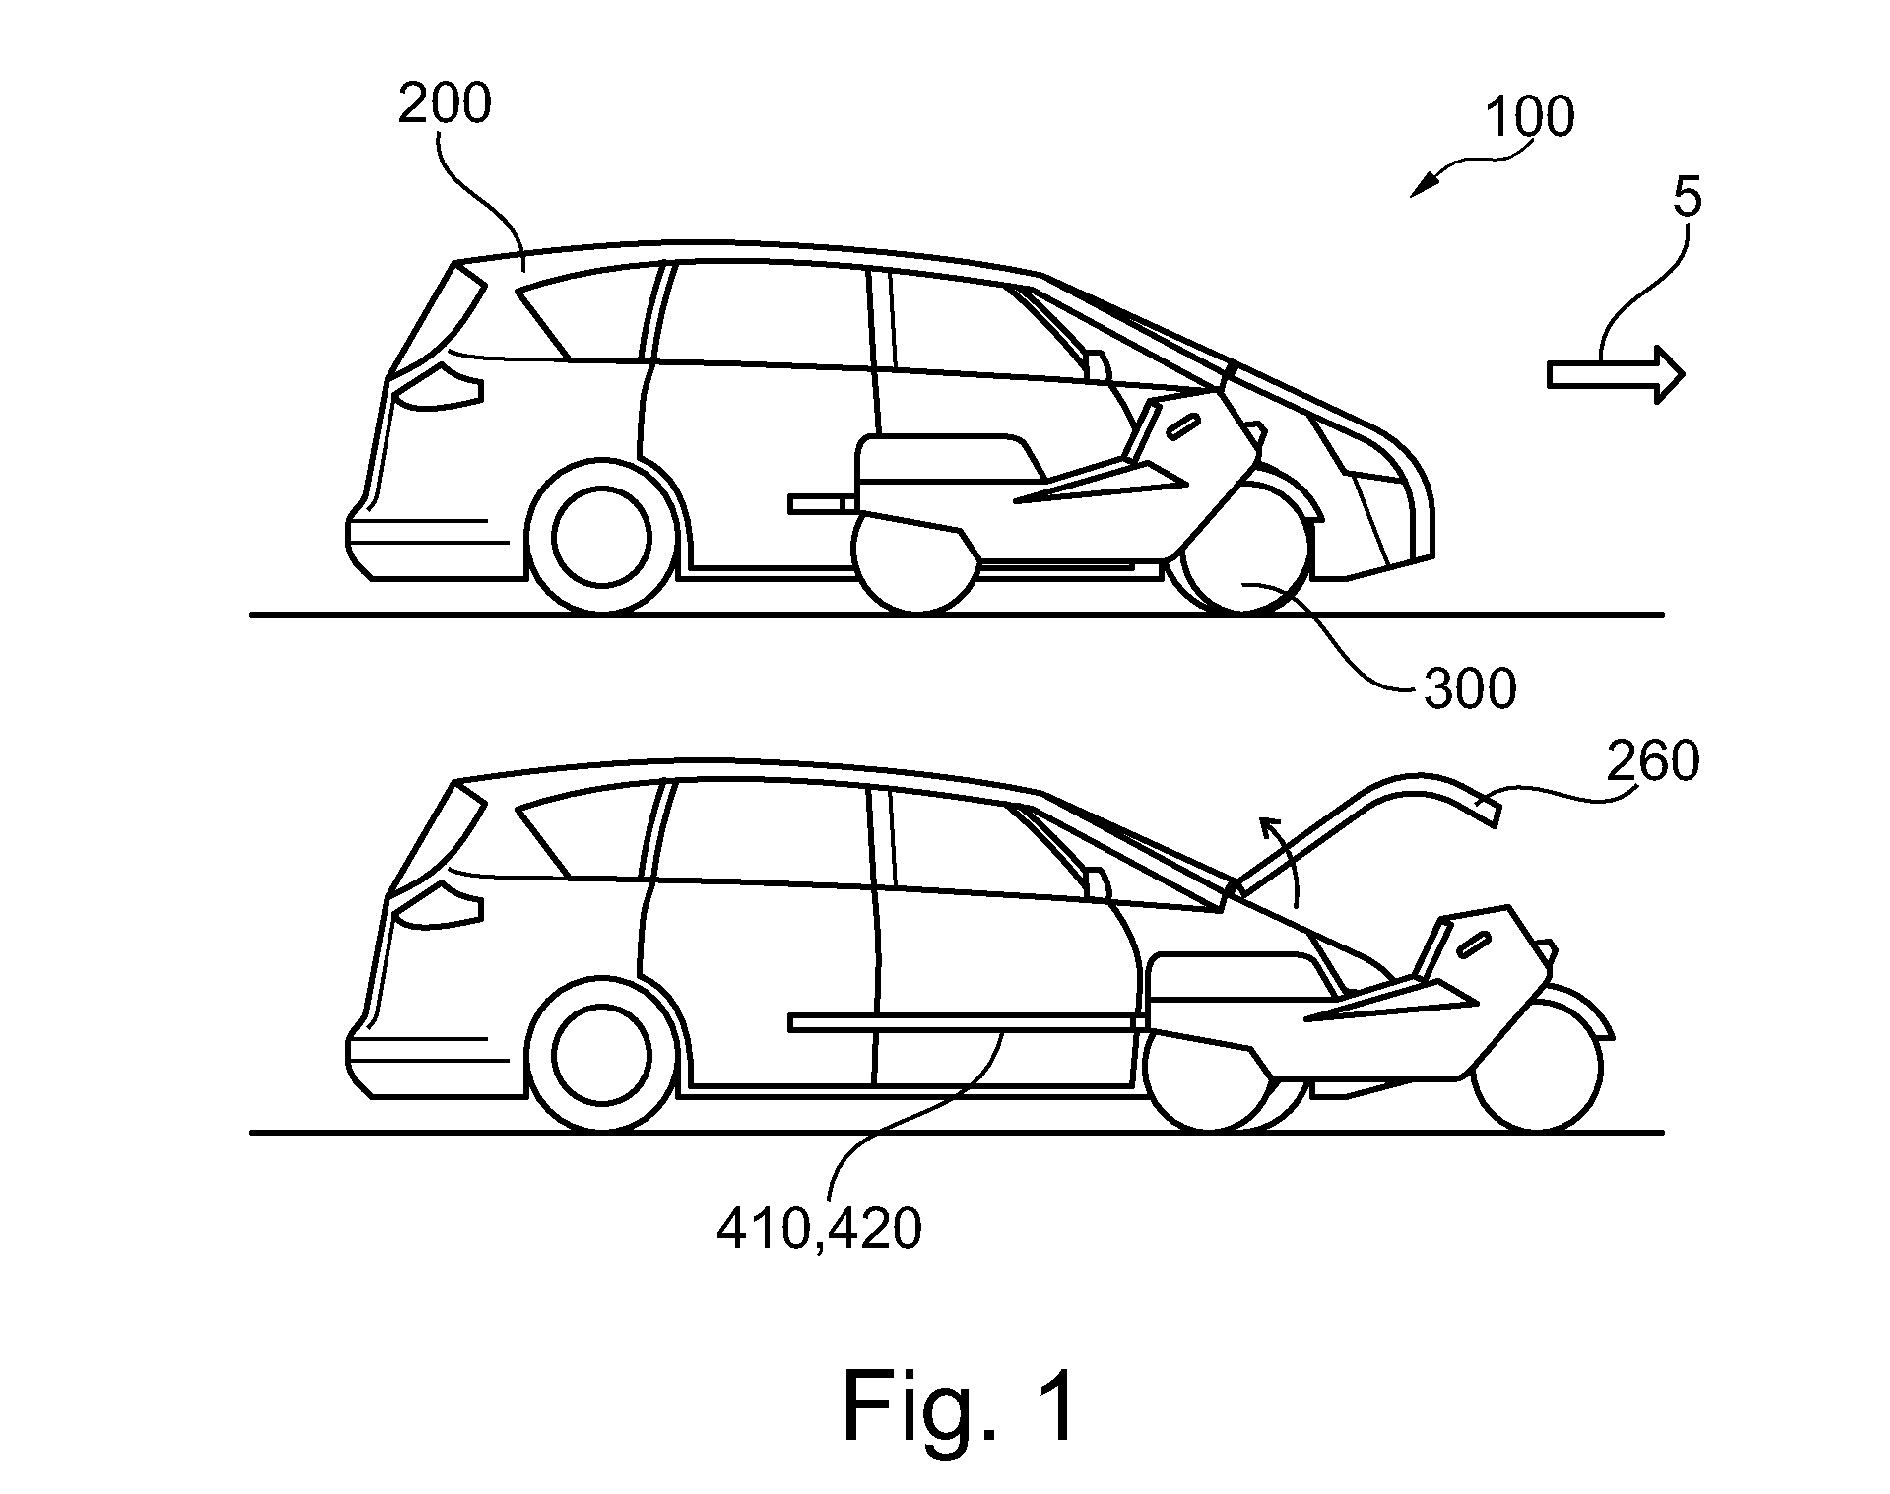 REVEALED: Ford patents car with built-in deployable motorcycle